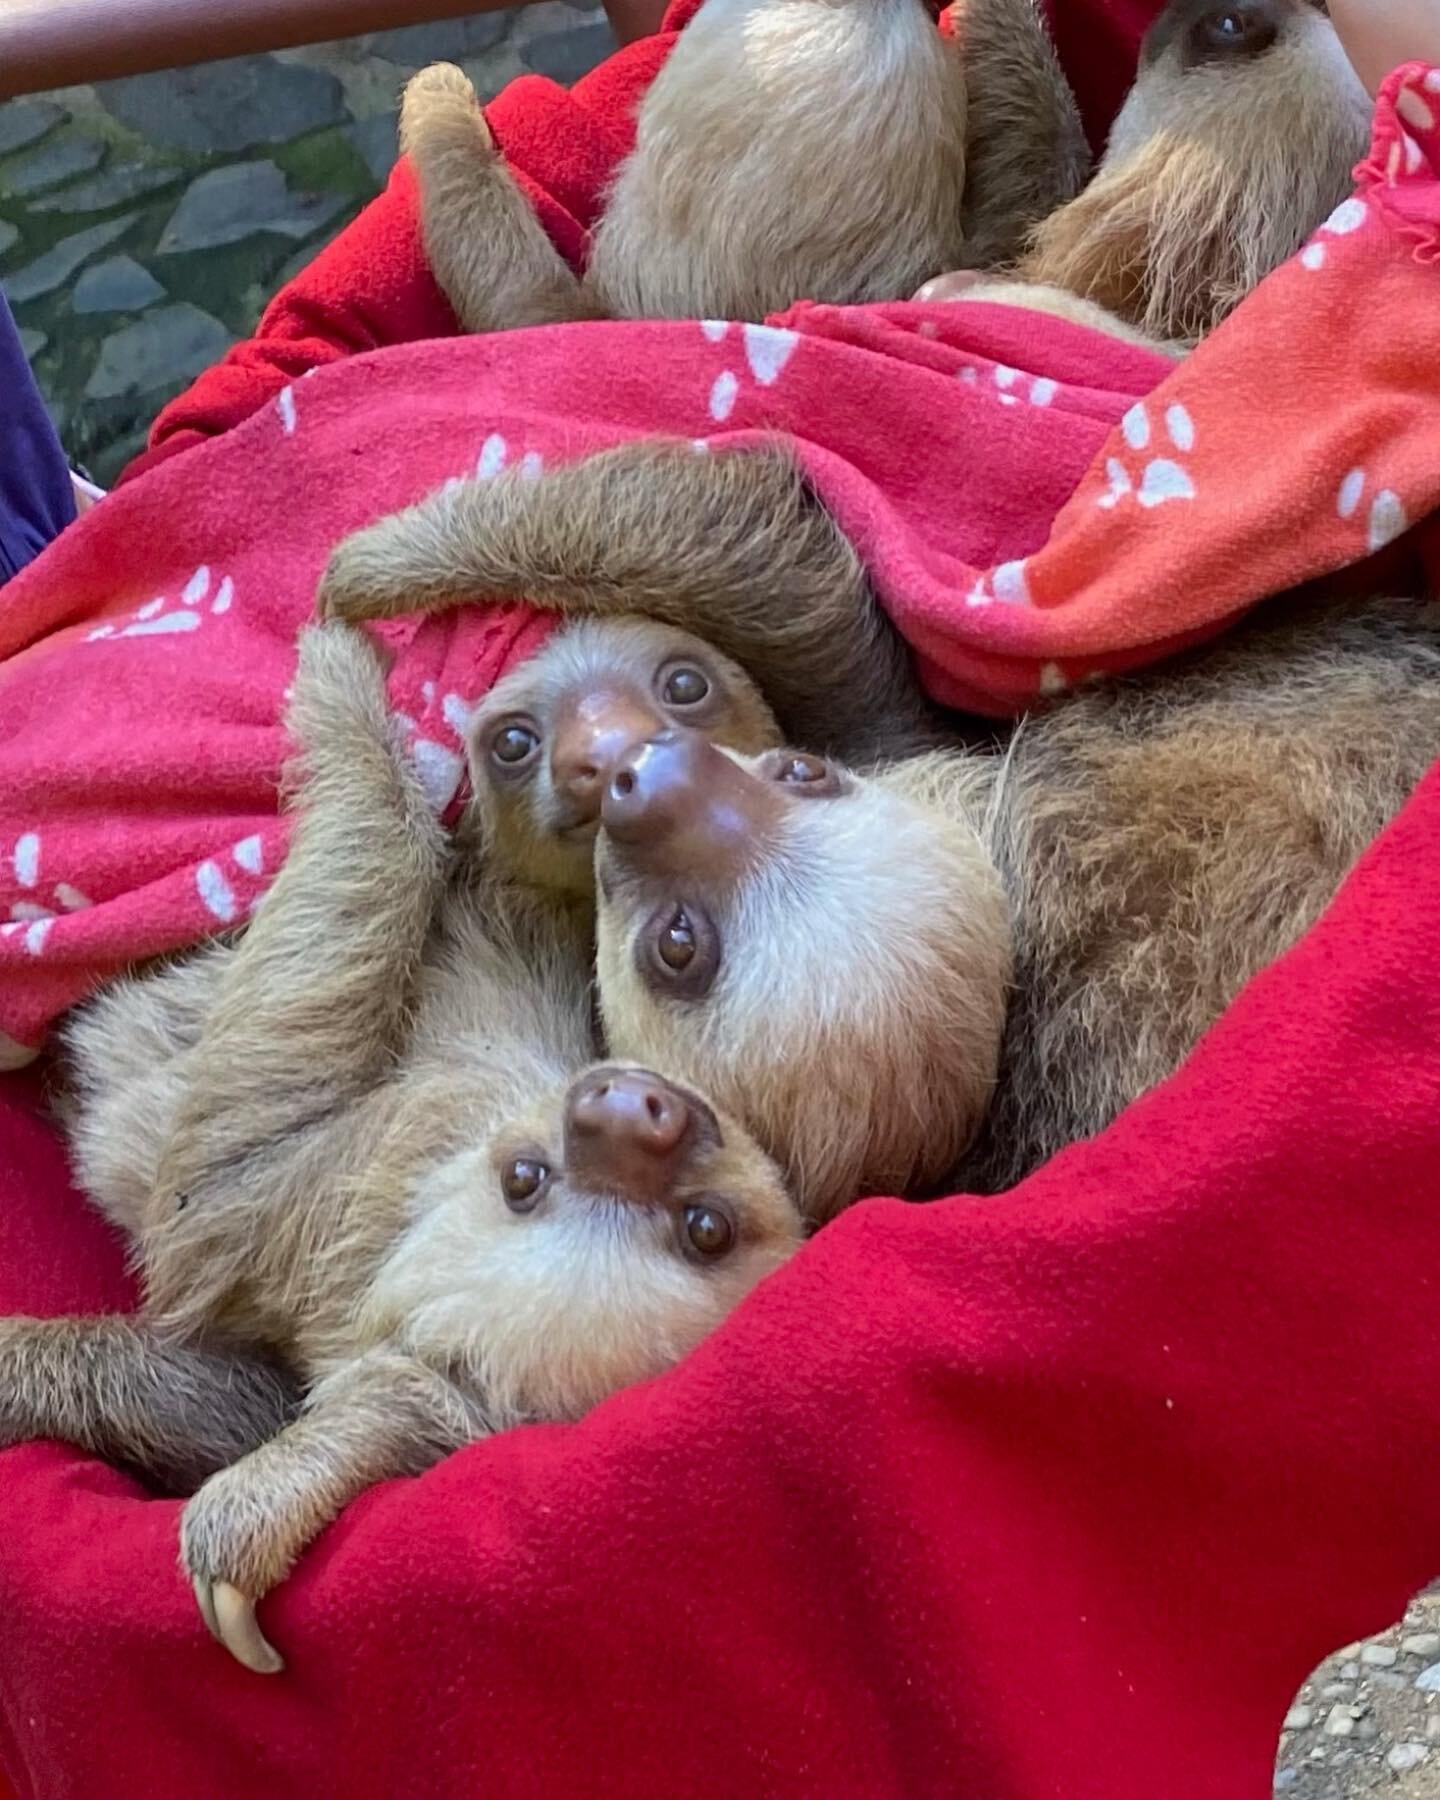 Happy Sunday! These sweet sloths were rescued and cared for at @jaguarrescuecentercr ❤️🌞❤️🌞 JRC does incredible work in the South Caribbean for sloths, monkeys, reptiles, birds and more! You can visit them if you travel to this beautiful area. They